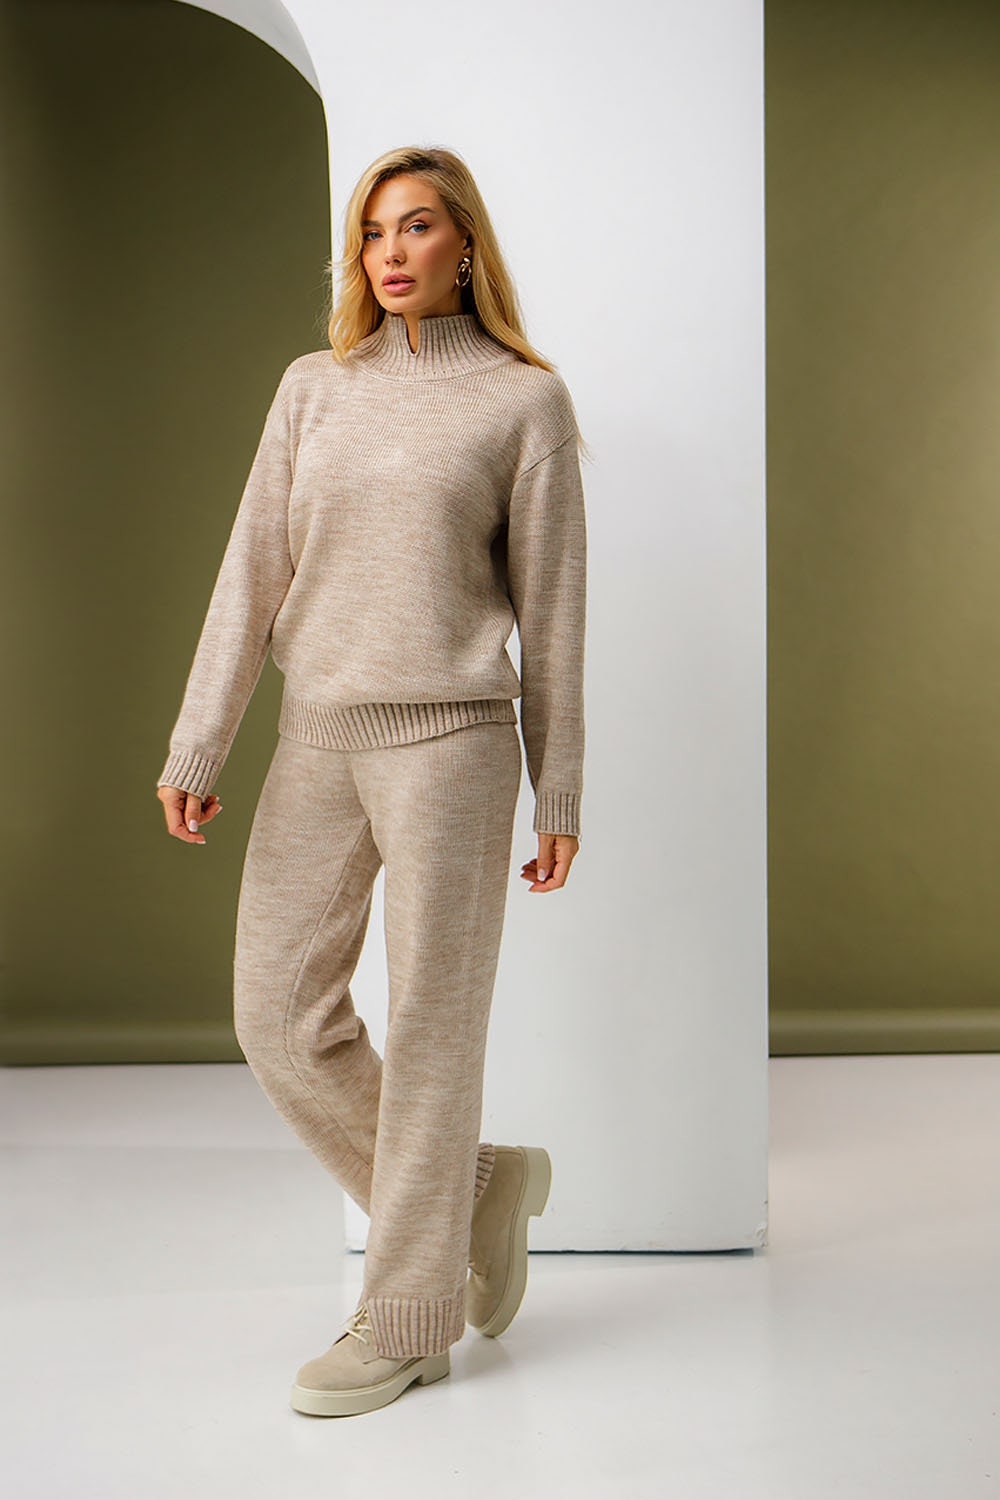 Buy Knit Loungewear Set Online In India -  India